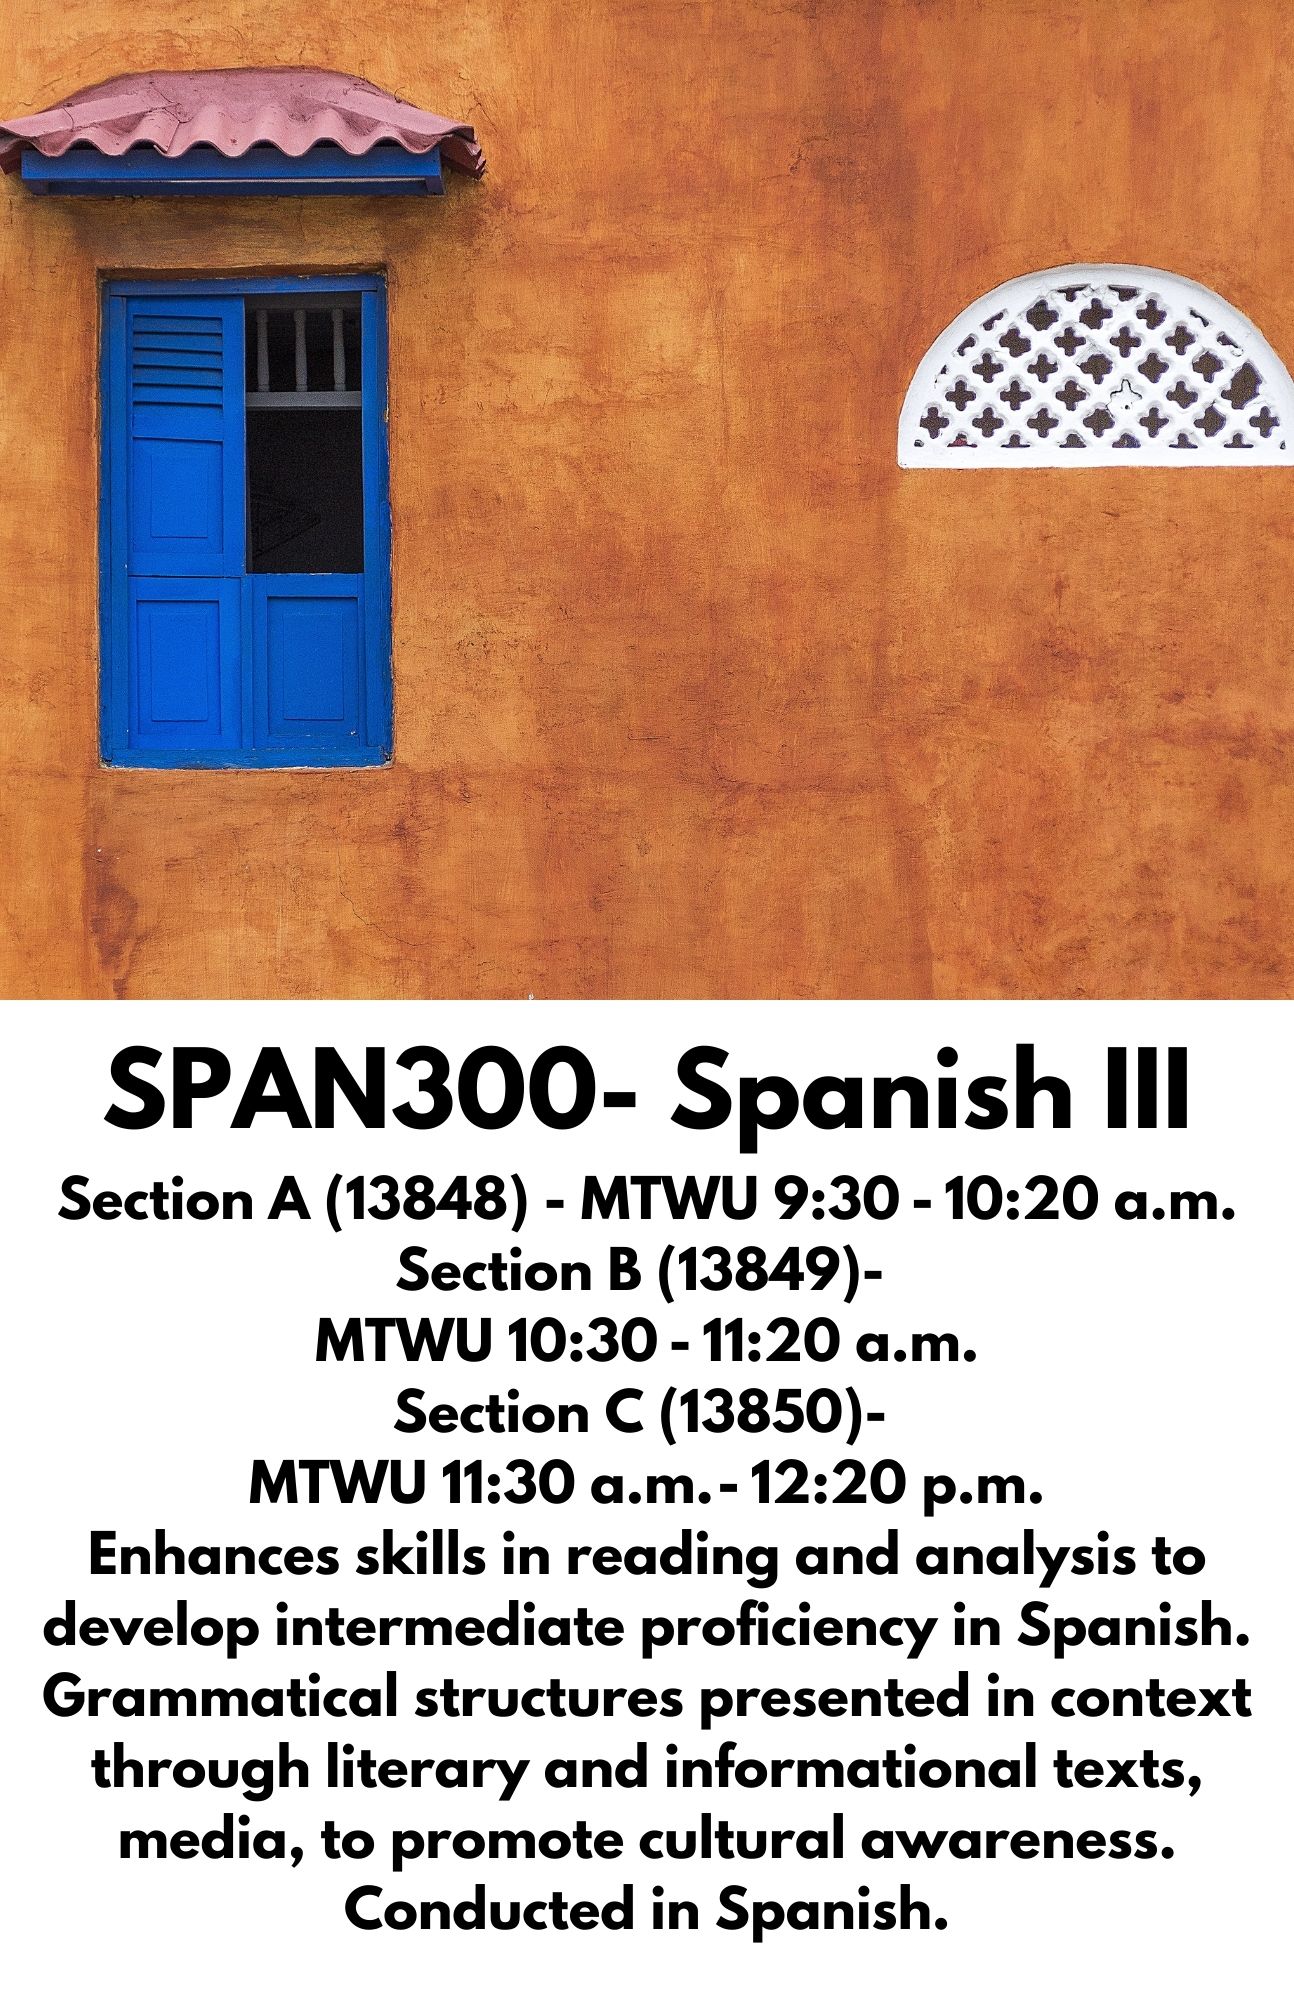 SPAN300- Spanish III Section A (13848) - MTWU 9:30 - 10:20 a.m. Section B (13849)-  MTWU 10:30 - 11:20 a.m. Section C (13850)-  MTWU 11:30 a.m. - 12:20 p.m. Enhances skills in reading and analysis to develop intermediate proficiency in Spanish. Grammatical structures presented in context through literary and informational texts, media, to promote cultural awareness. Conducted in Spanish.